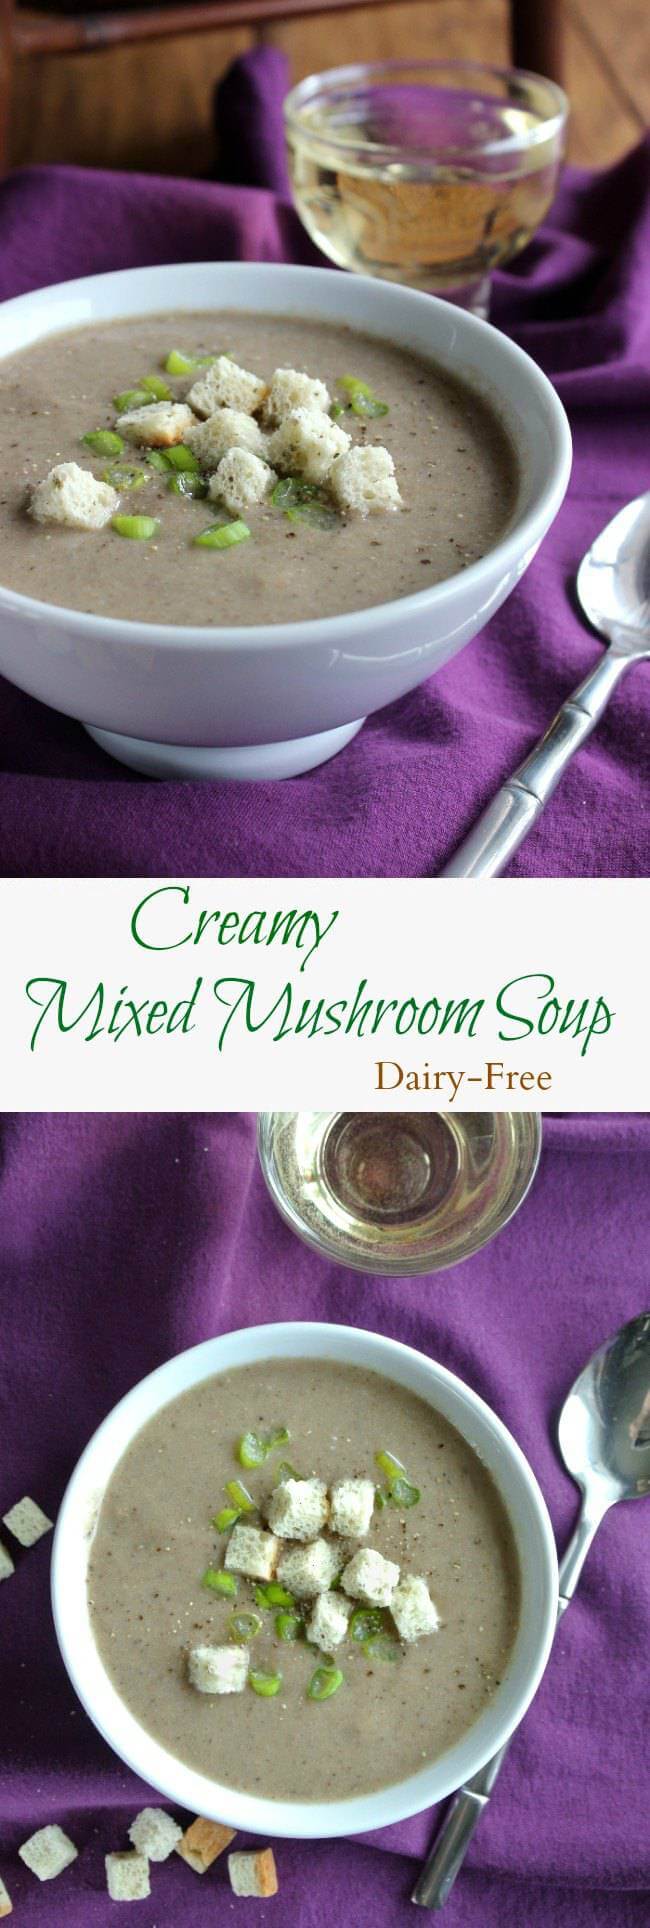 Creamy Mixed Mushroom Soup is packed with a favorite superfood - mushrooms! Seasoned just right, this simple soup will have people coming back for more.